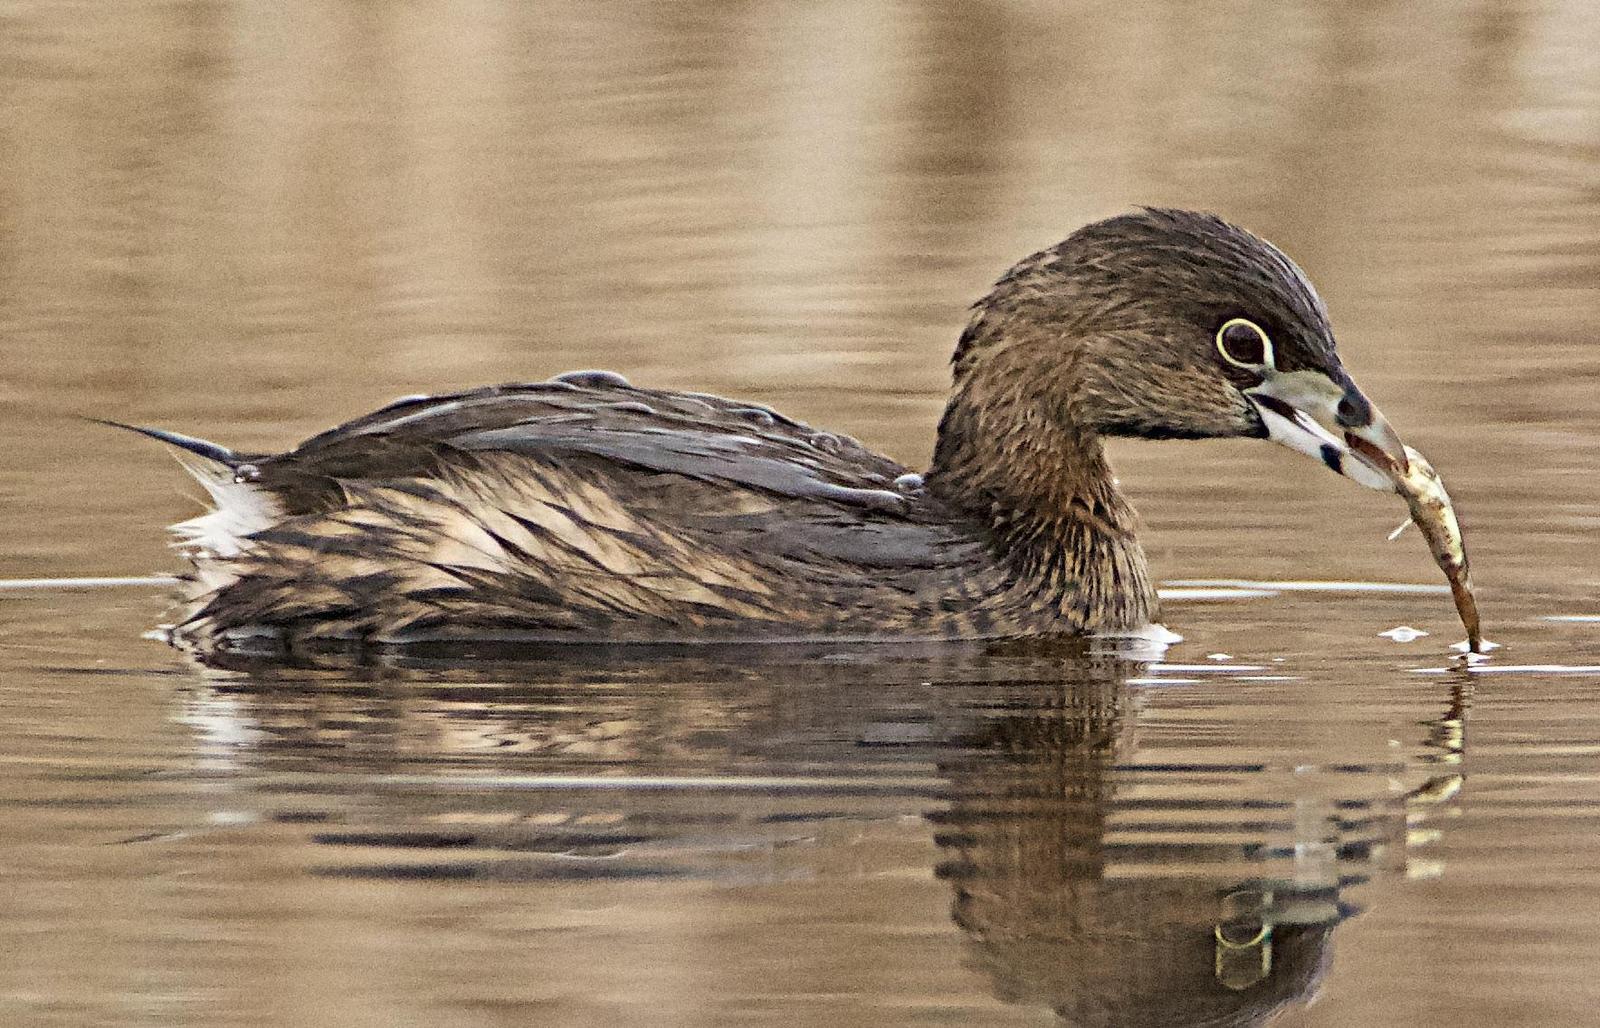 Pied-billed Grebe Photo by Brian Avent